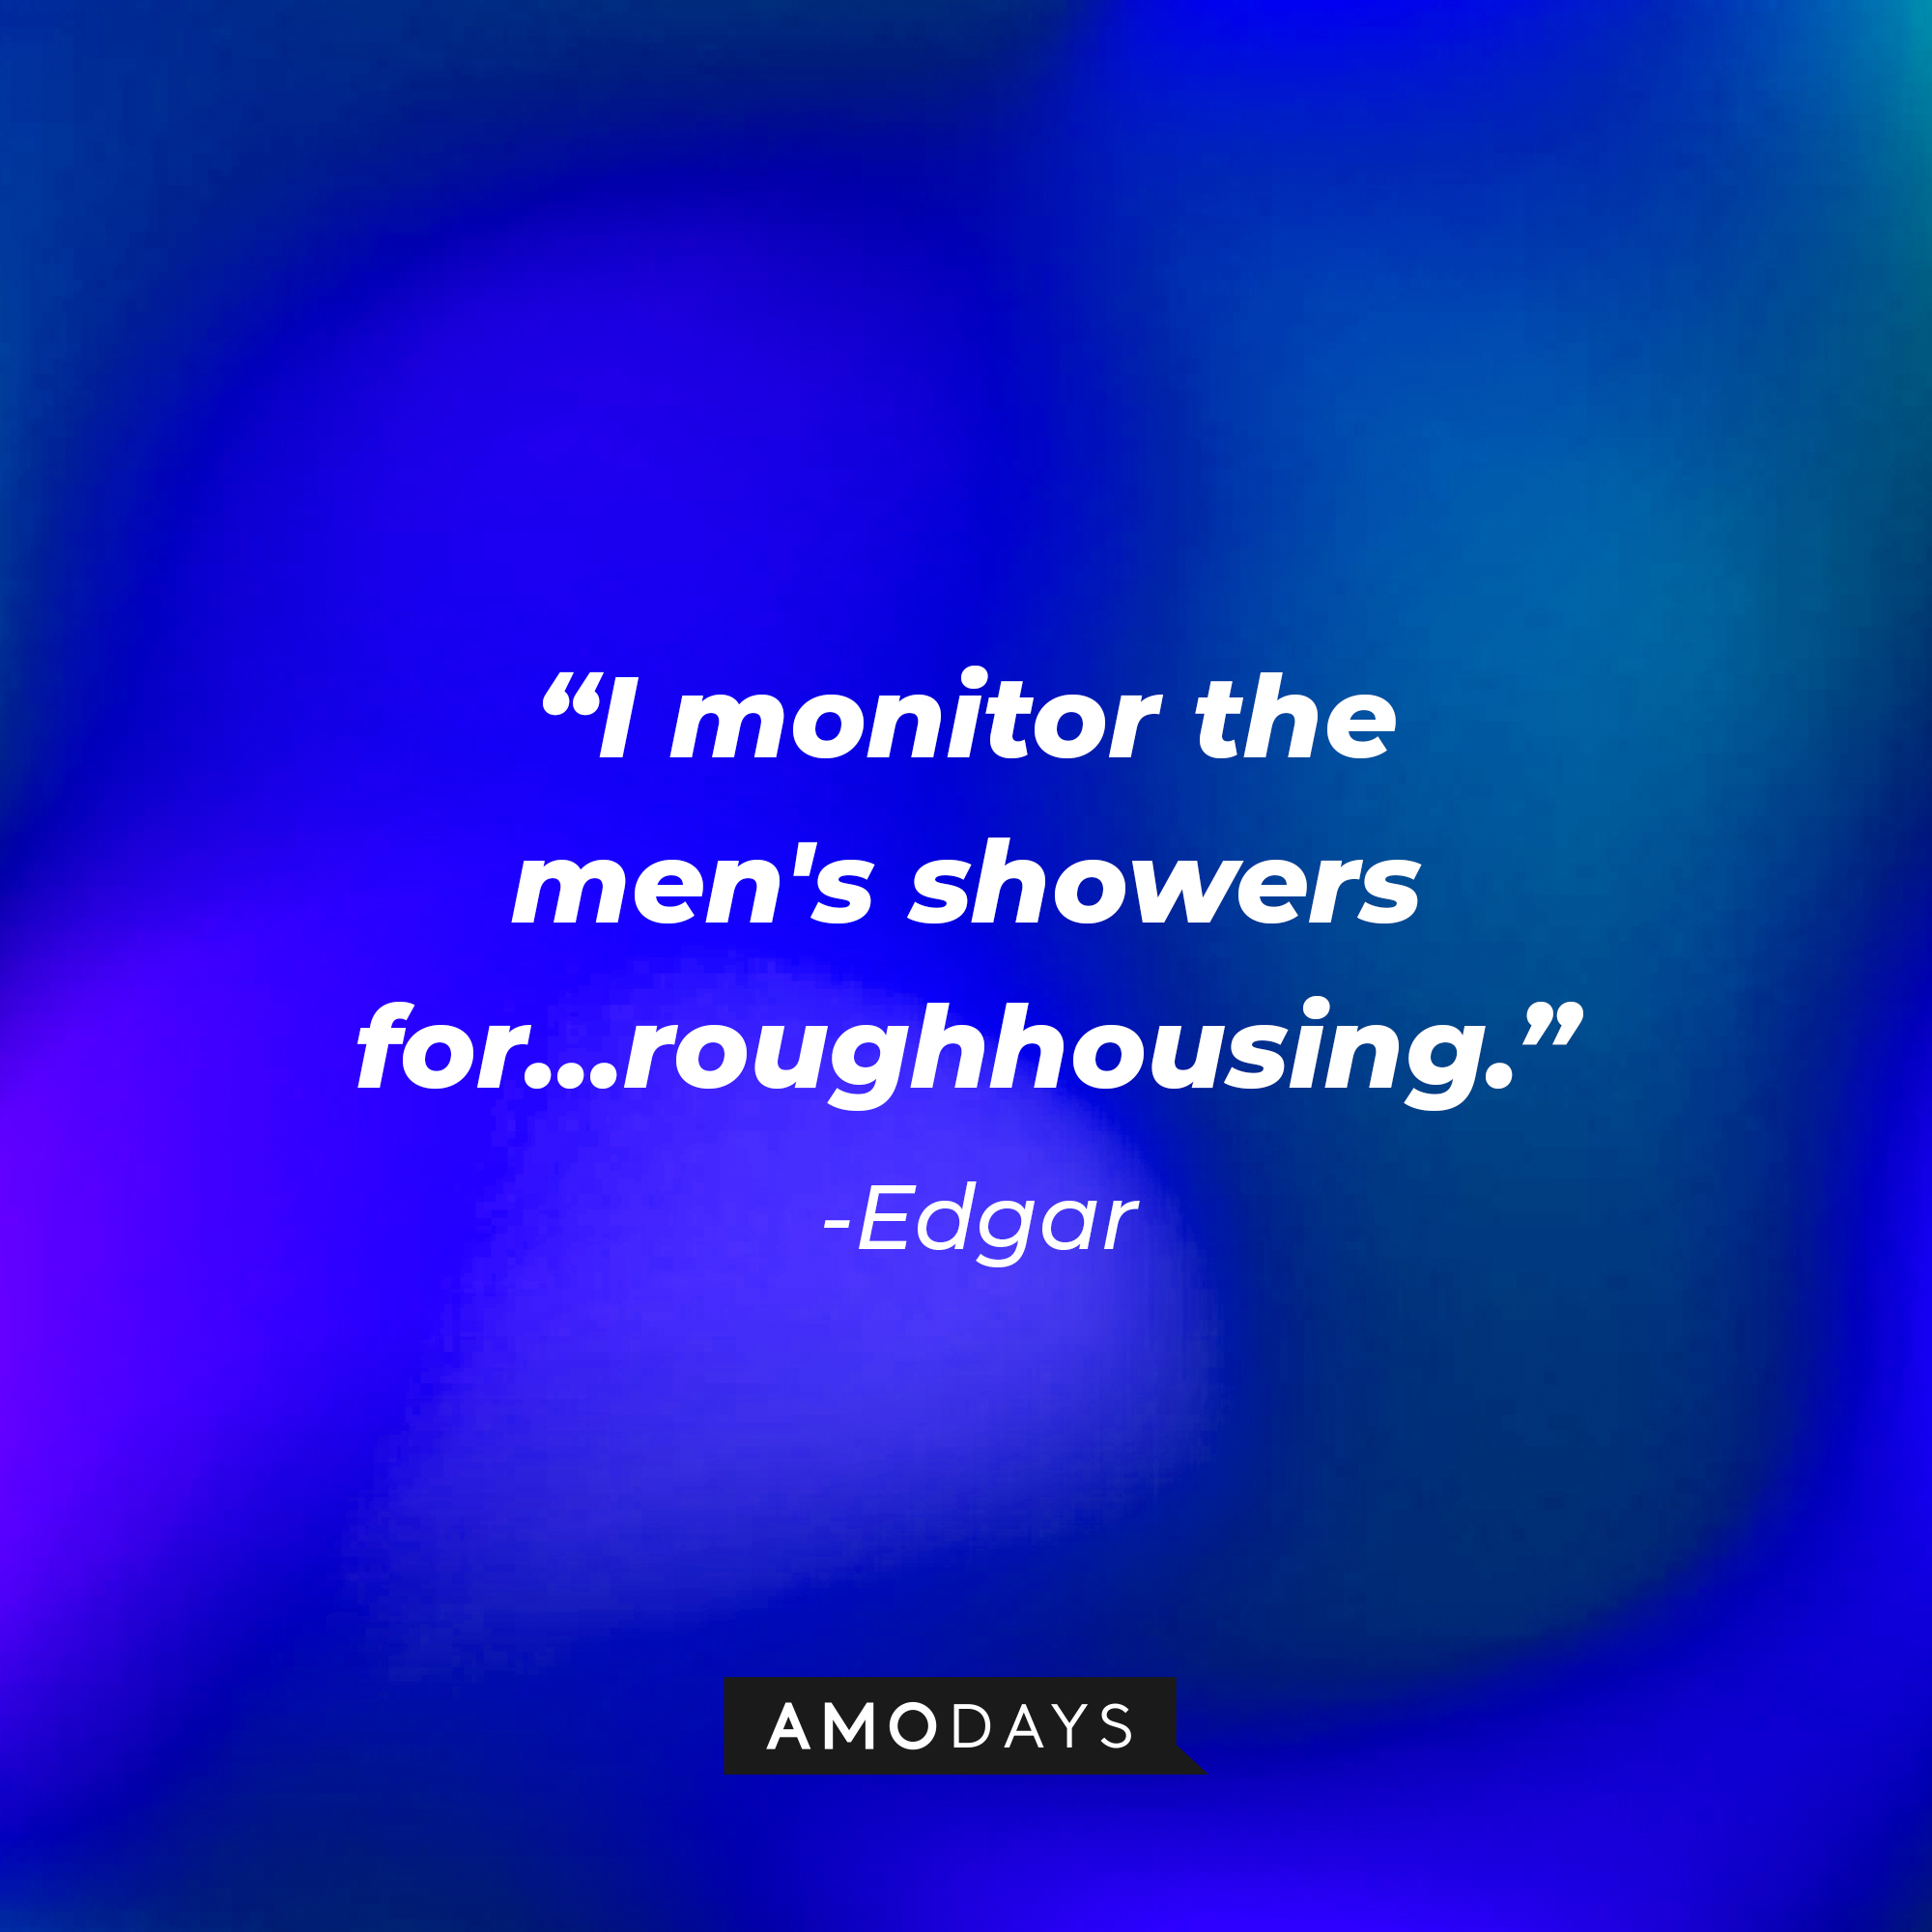 Edgar’s quote: "I monitor the men's showers for...roughhousing." | Source: AmoDays